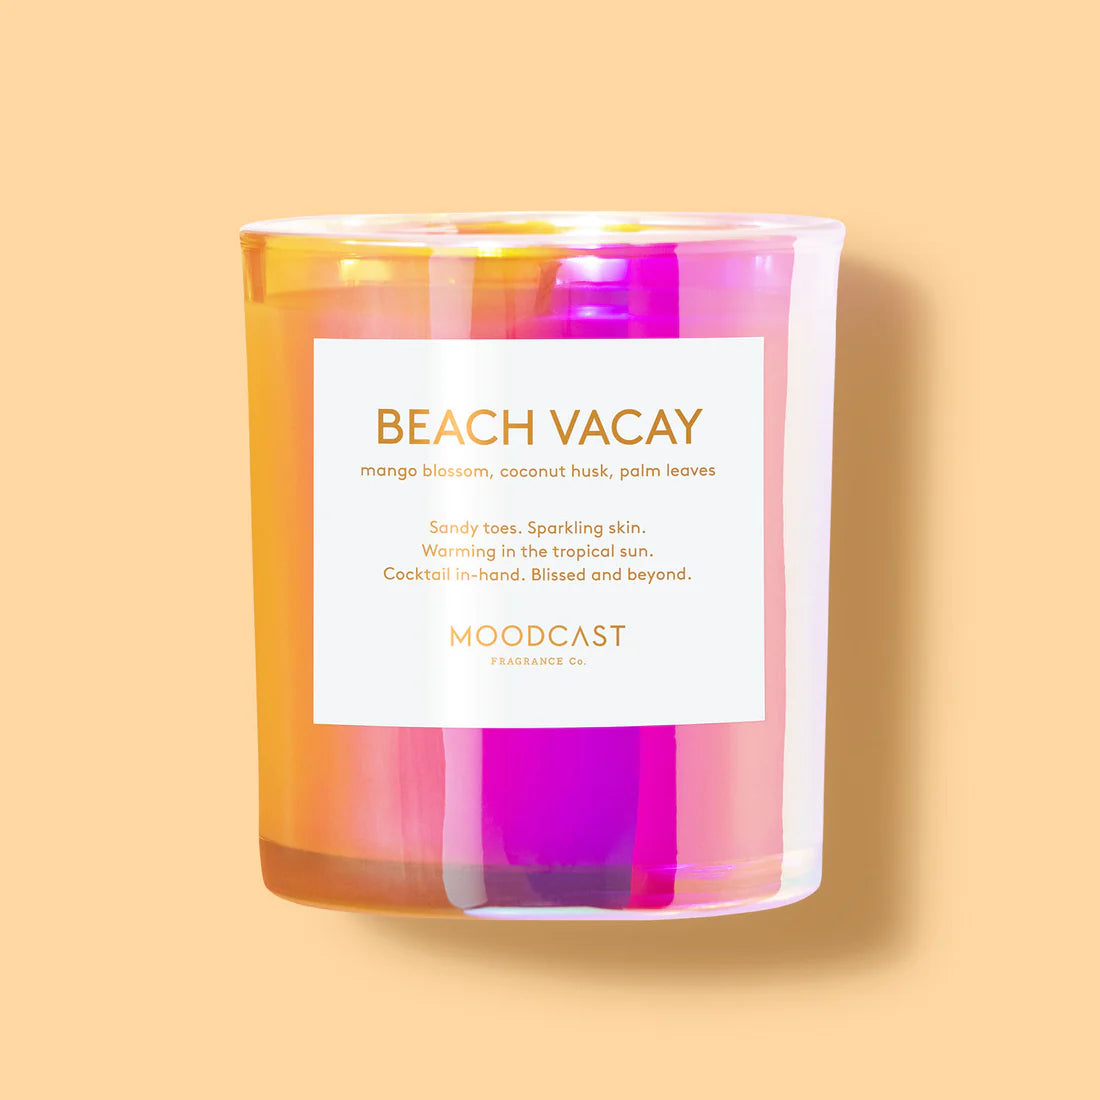 Moodcast Candle Iridescent 8oz Candles in Beach Vacay at Wrapsody